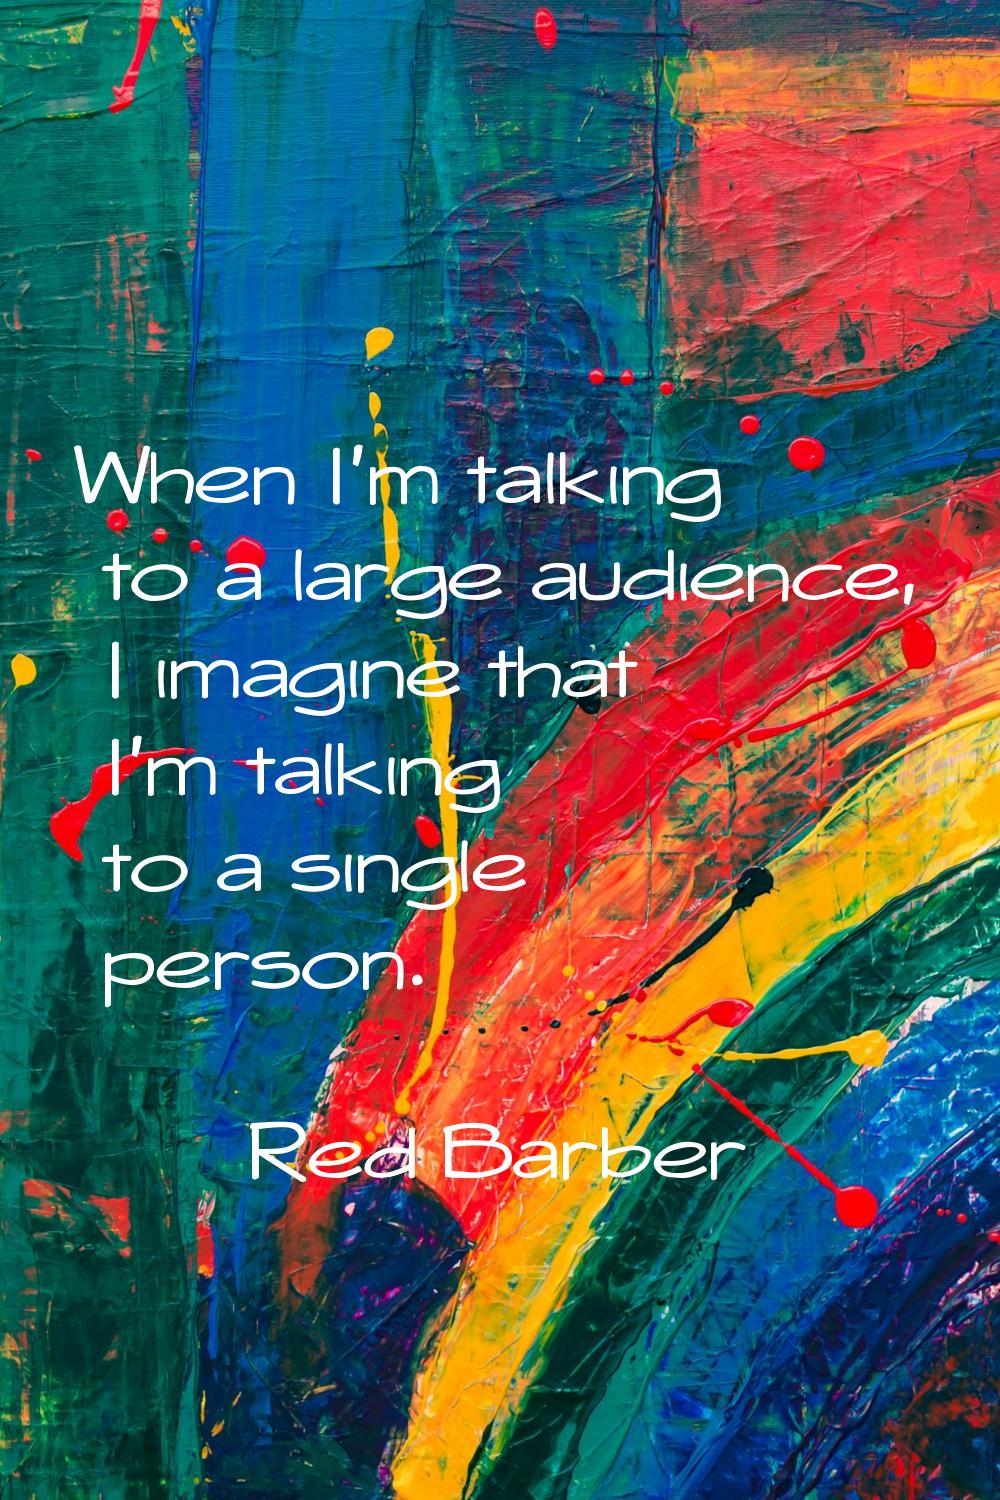 When I'm talking to a large audience, I imagine that I'm talking to a single person.